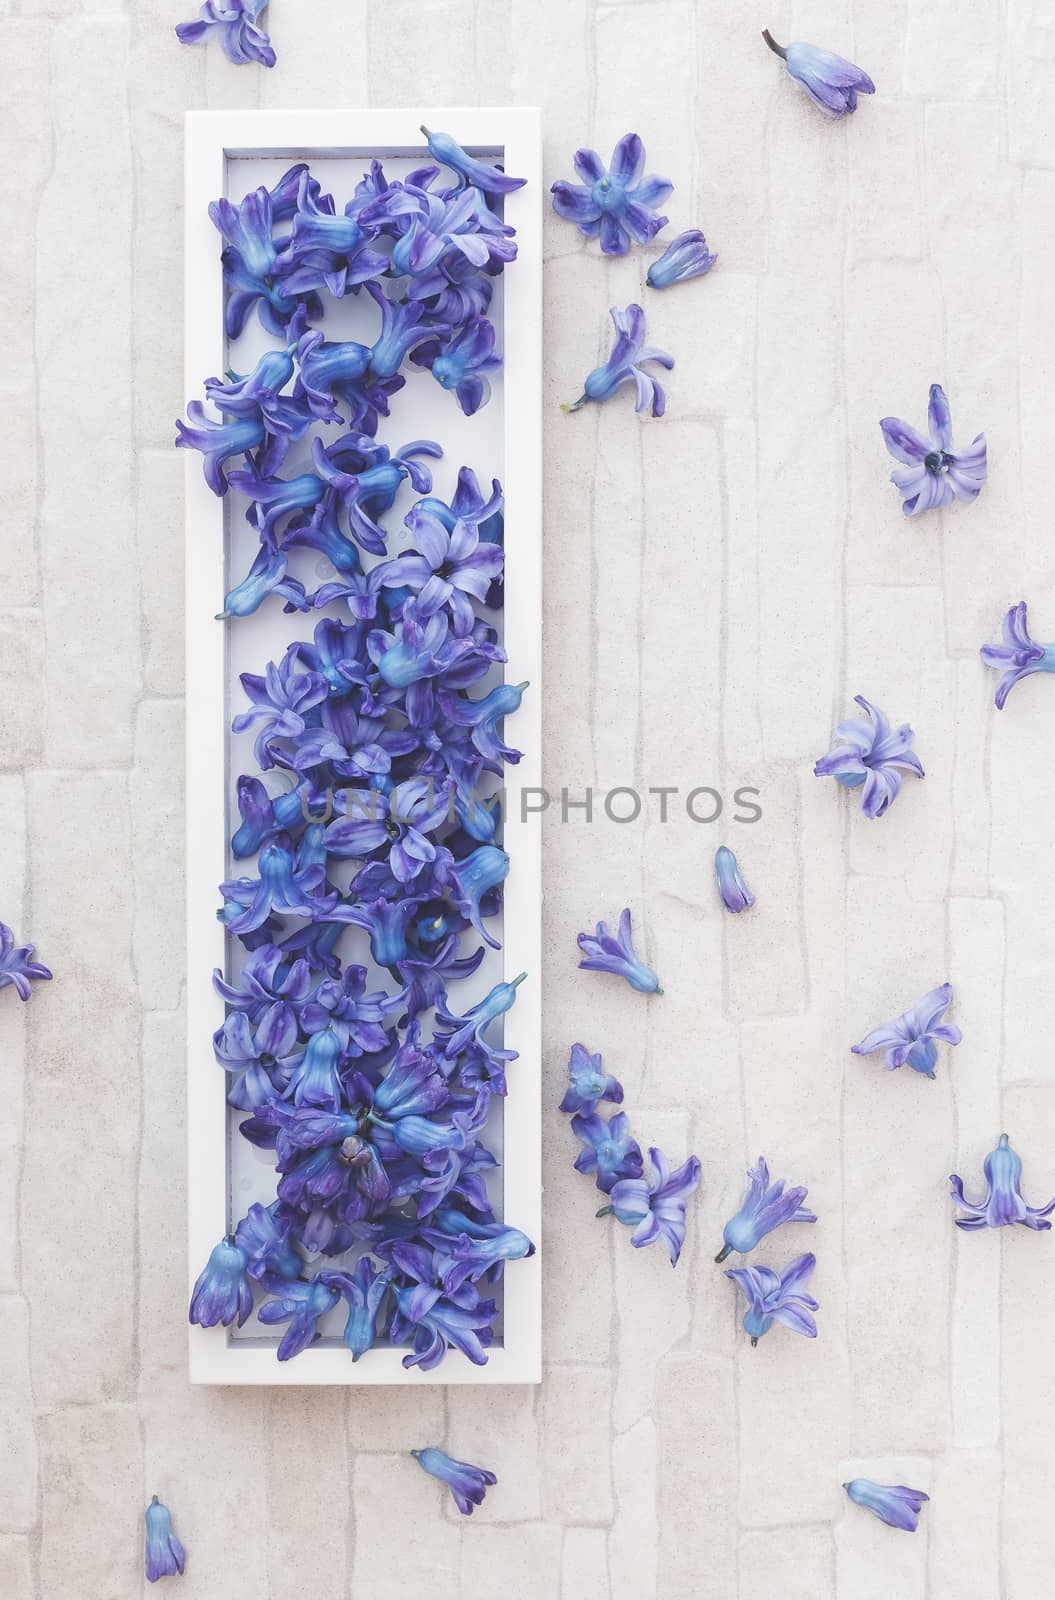 Blue hyacinths flowers arrangement on a tray. Overhead view with blank space